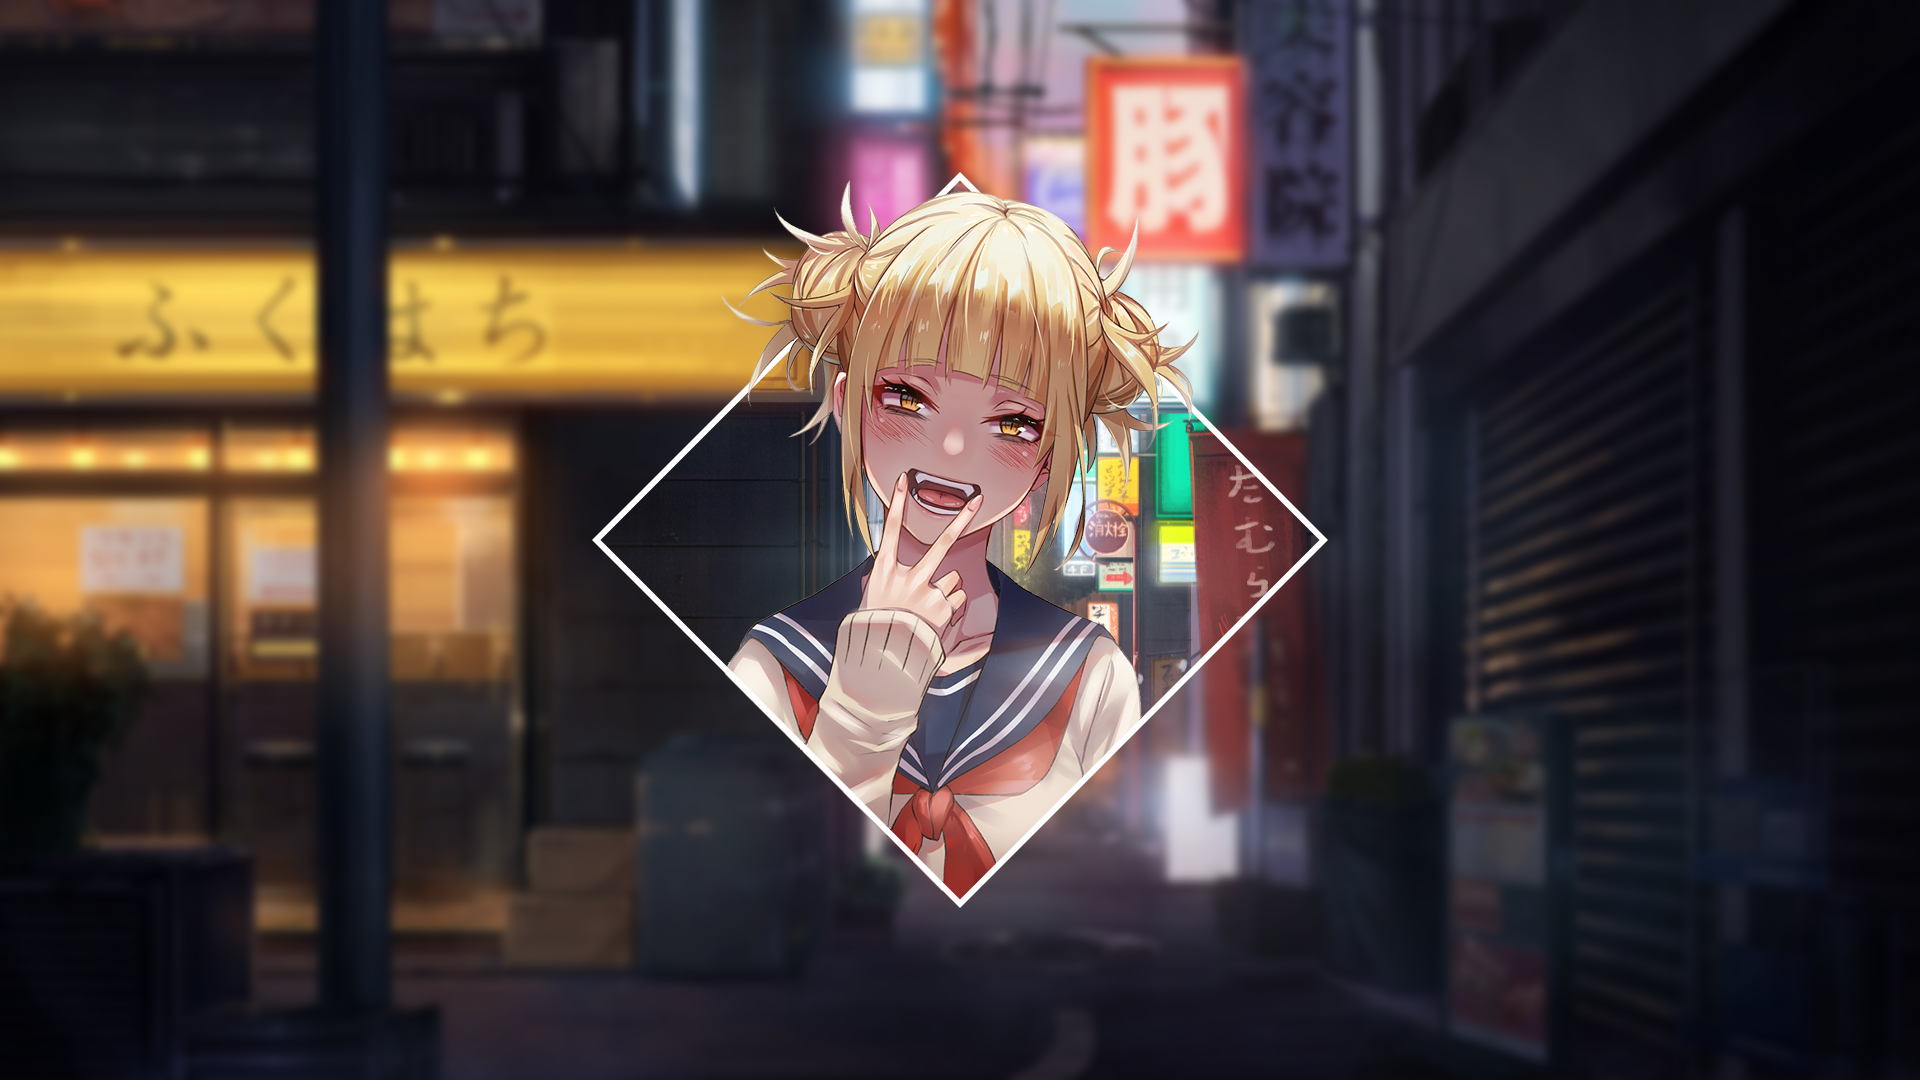 Toga (BNHA) [1920x1080] #Music #IndieArtist #Chicago. HD anime wallpaper, Toga, Hero wallpaper